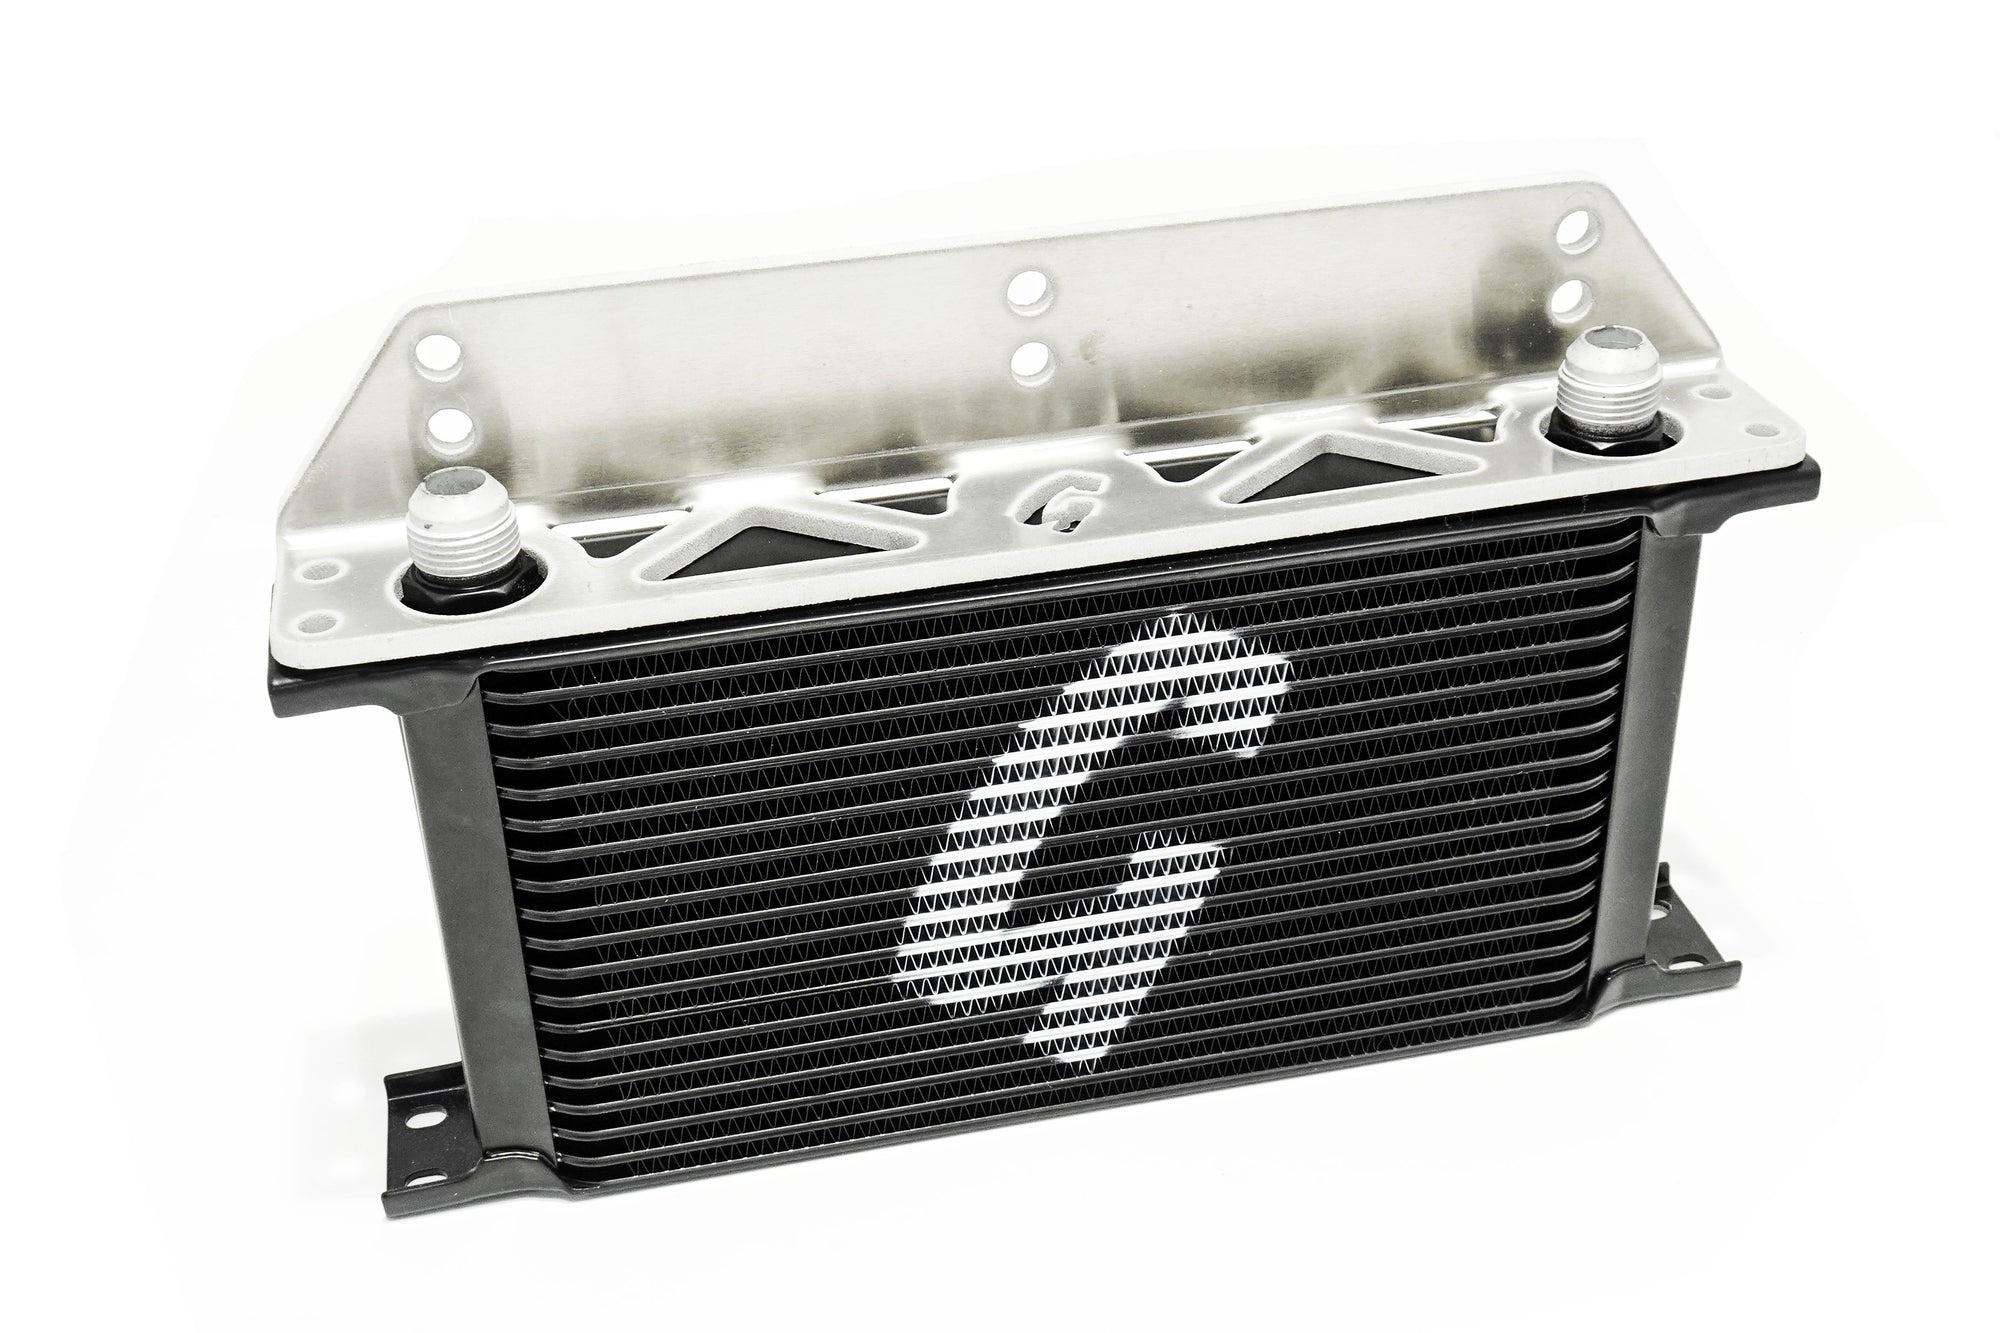 grassroots oil cooler with mount bracket